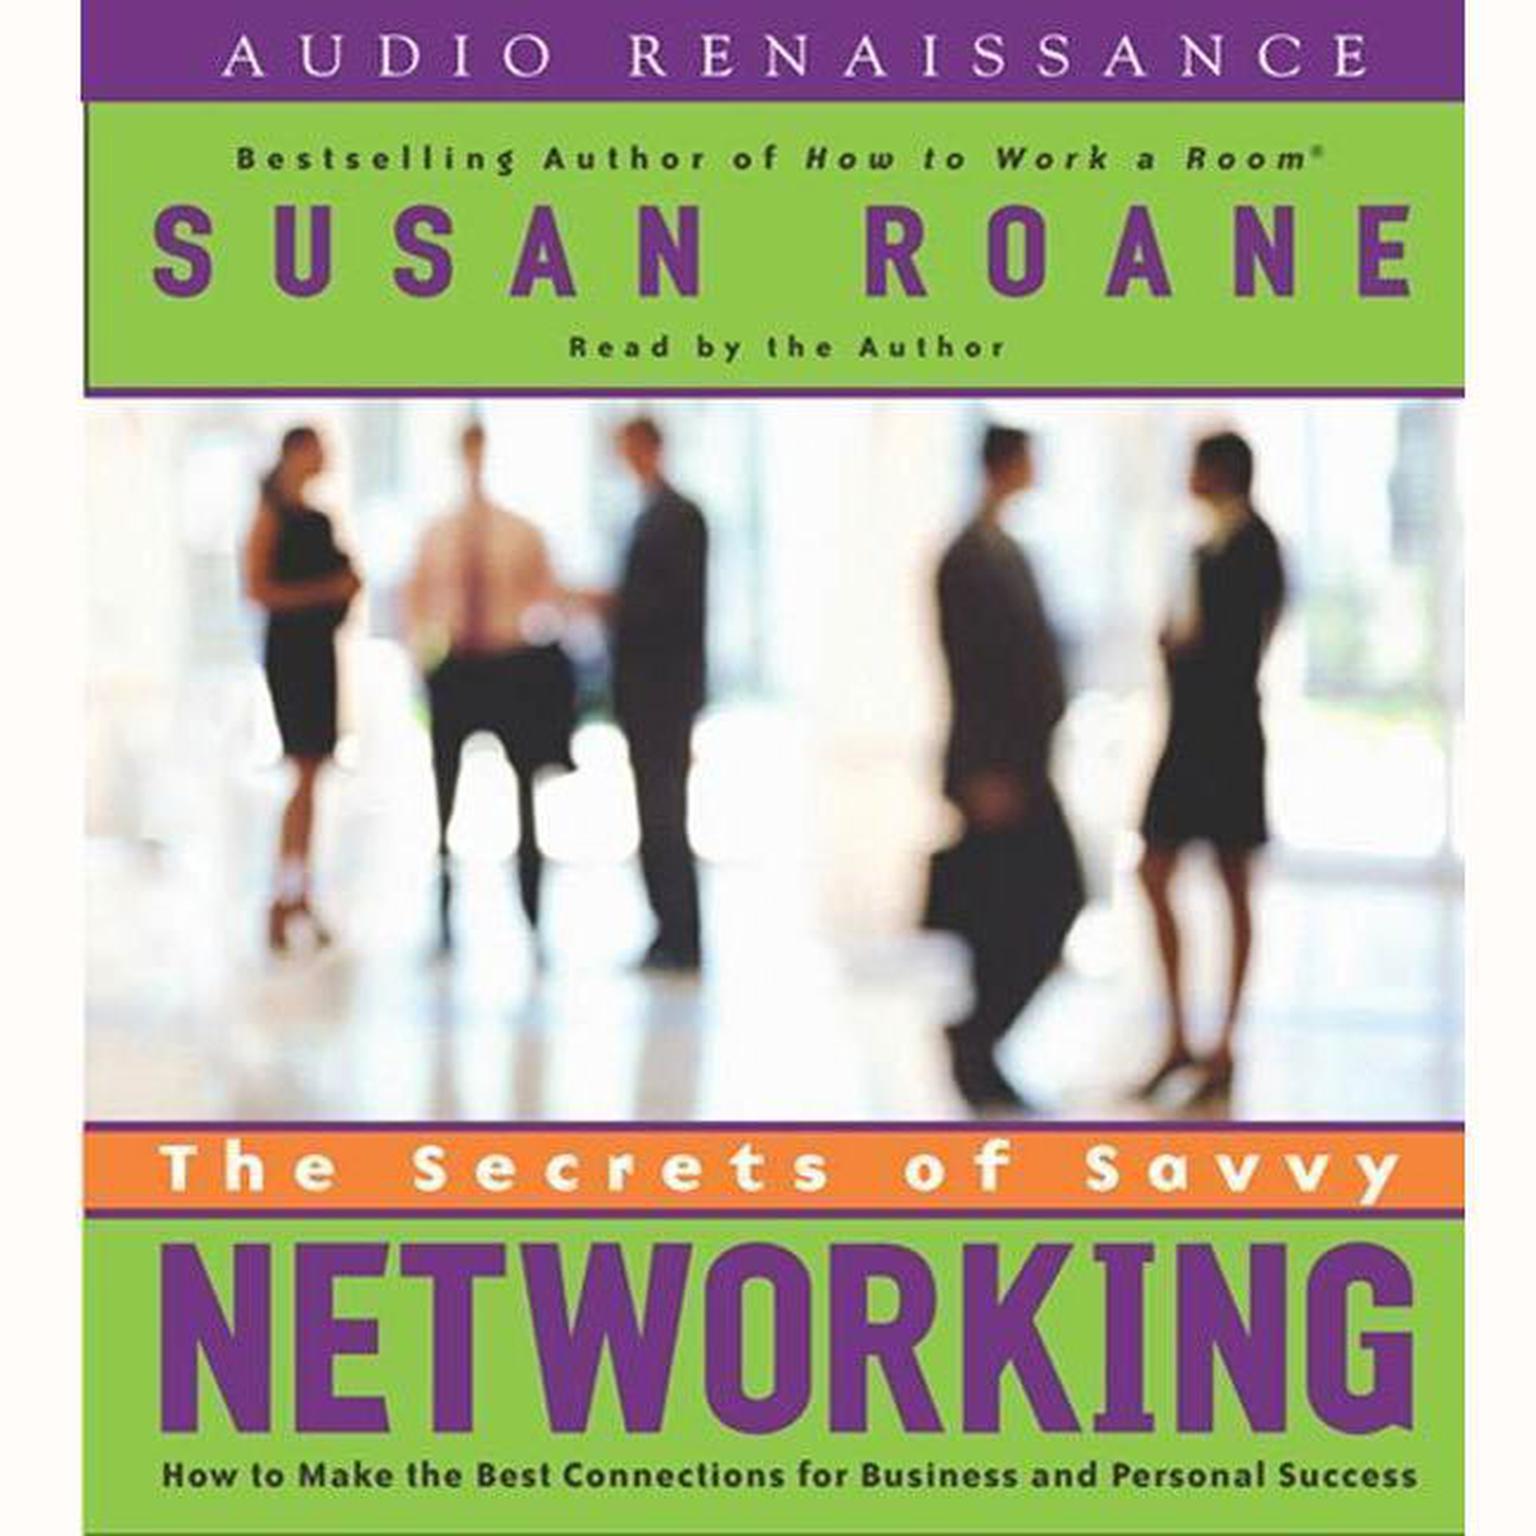 The Secrets of Savvy Networking (Abridged): How to Make the Best Connections for Business and Personal Success Audiobook, by Susan RoAne